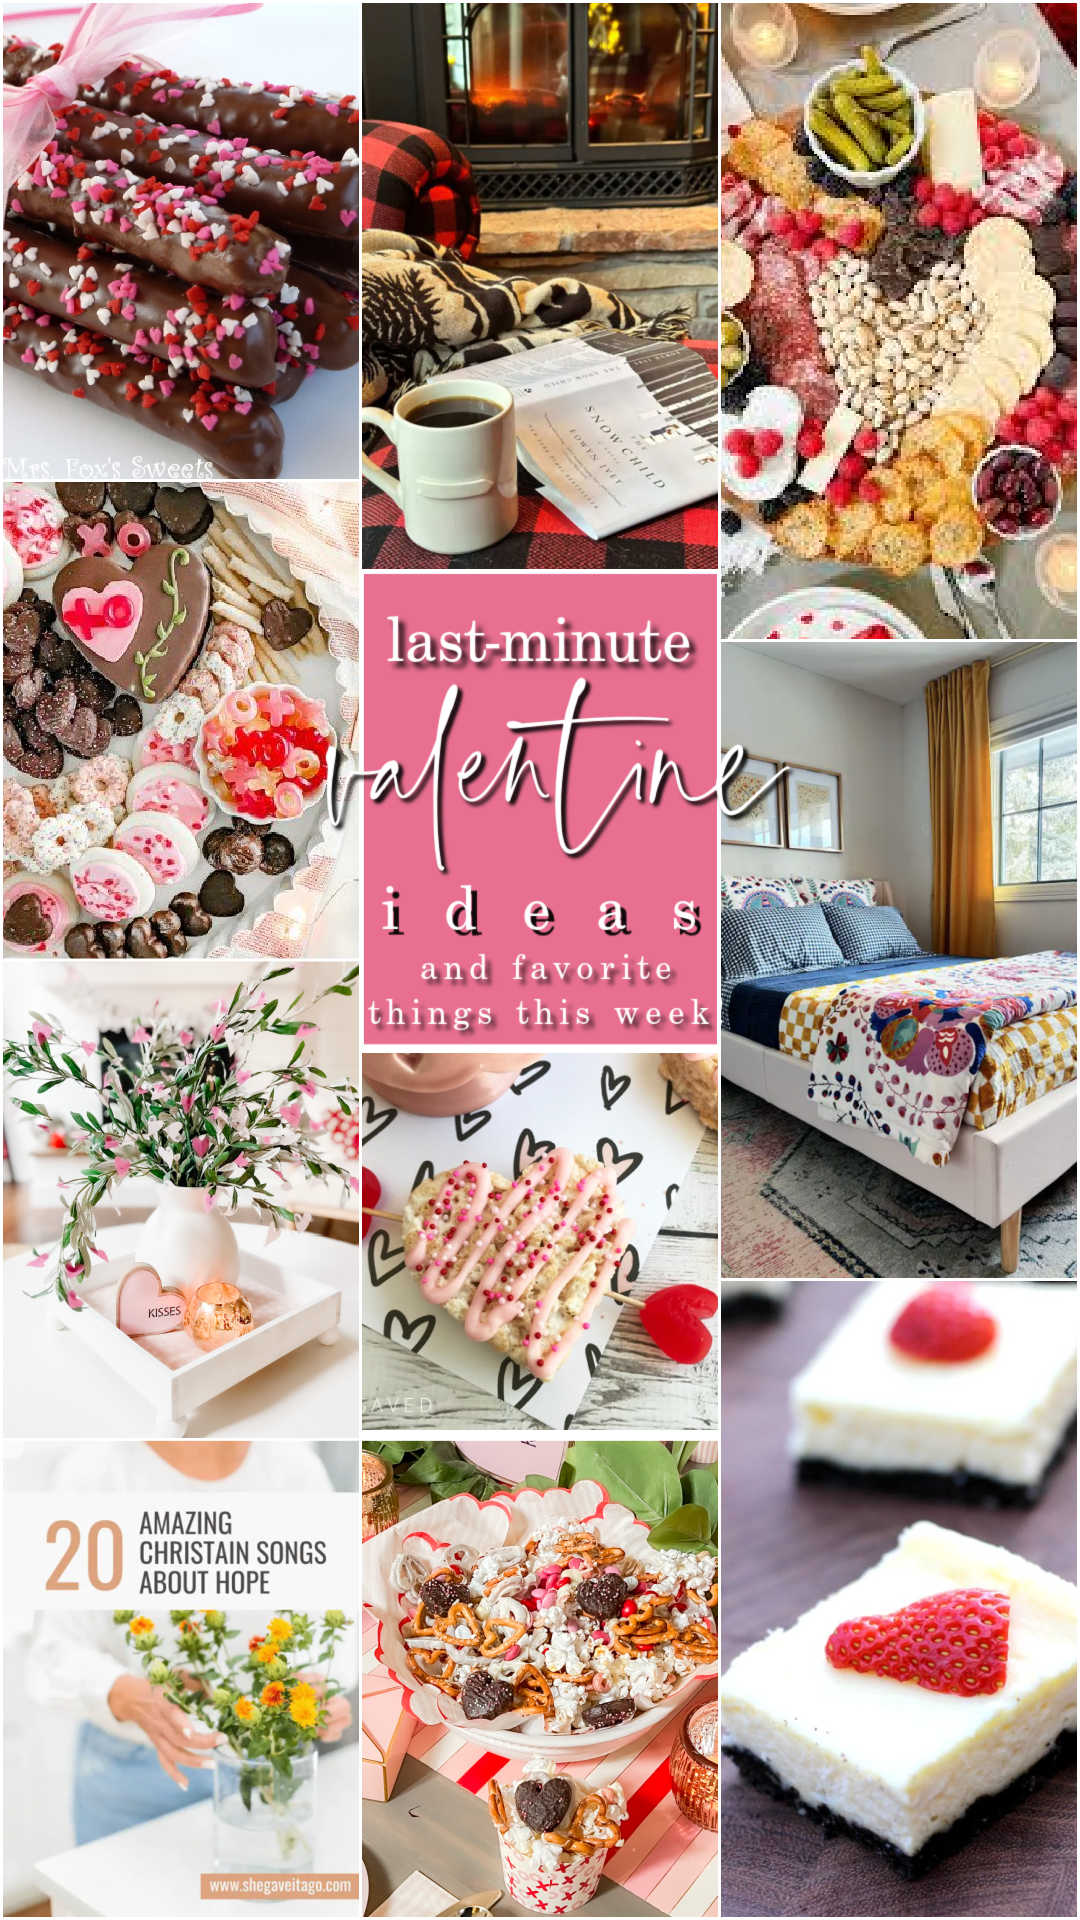 Last-Minute Valentine's Day Ideas. Easy ways to spread last-minute Valentine cheer and favorite things this week!